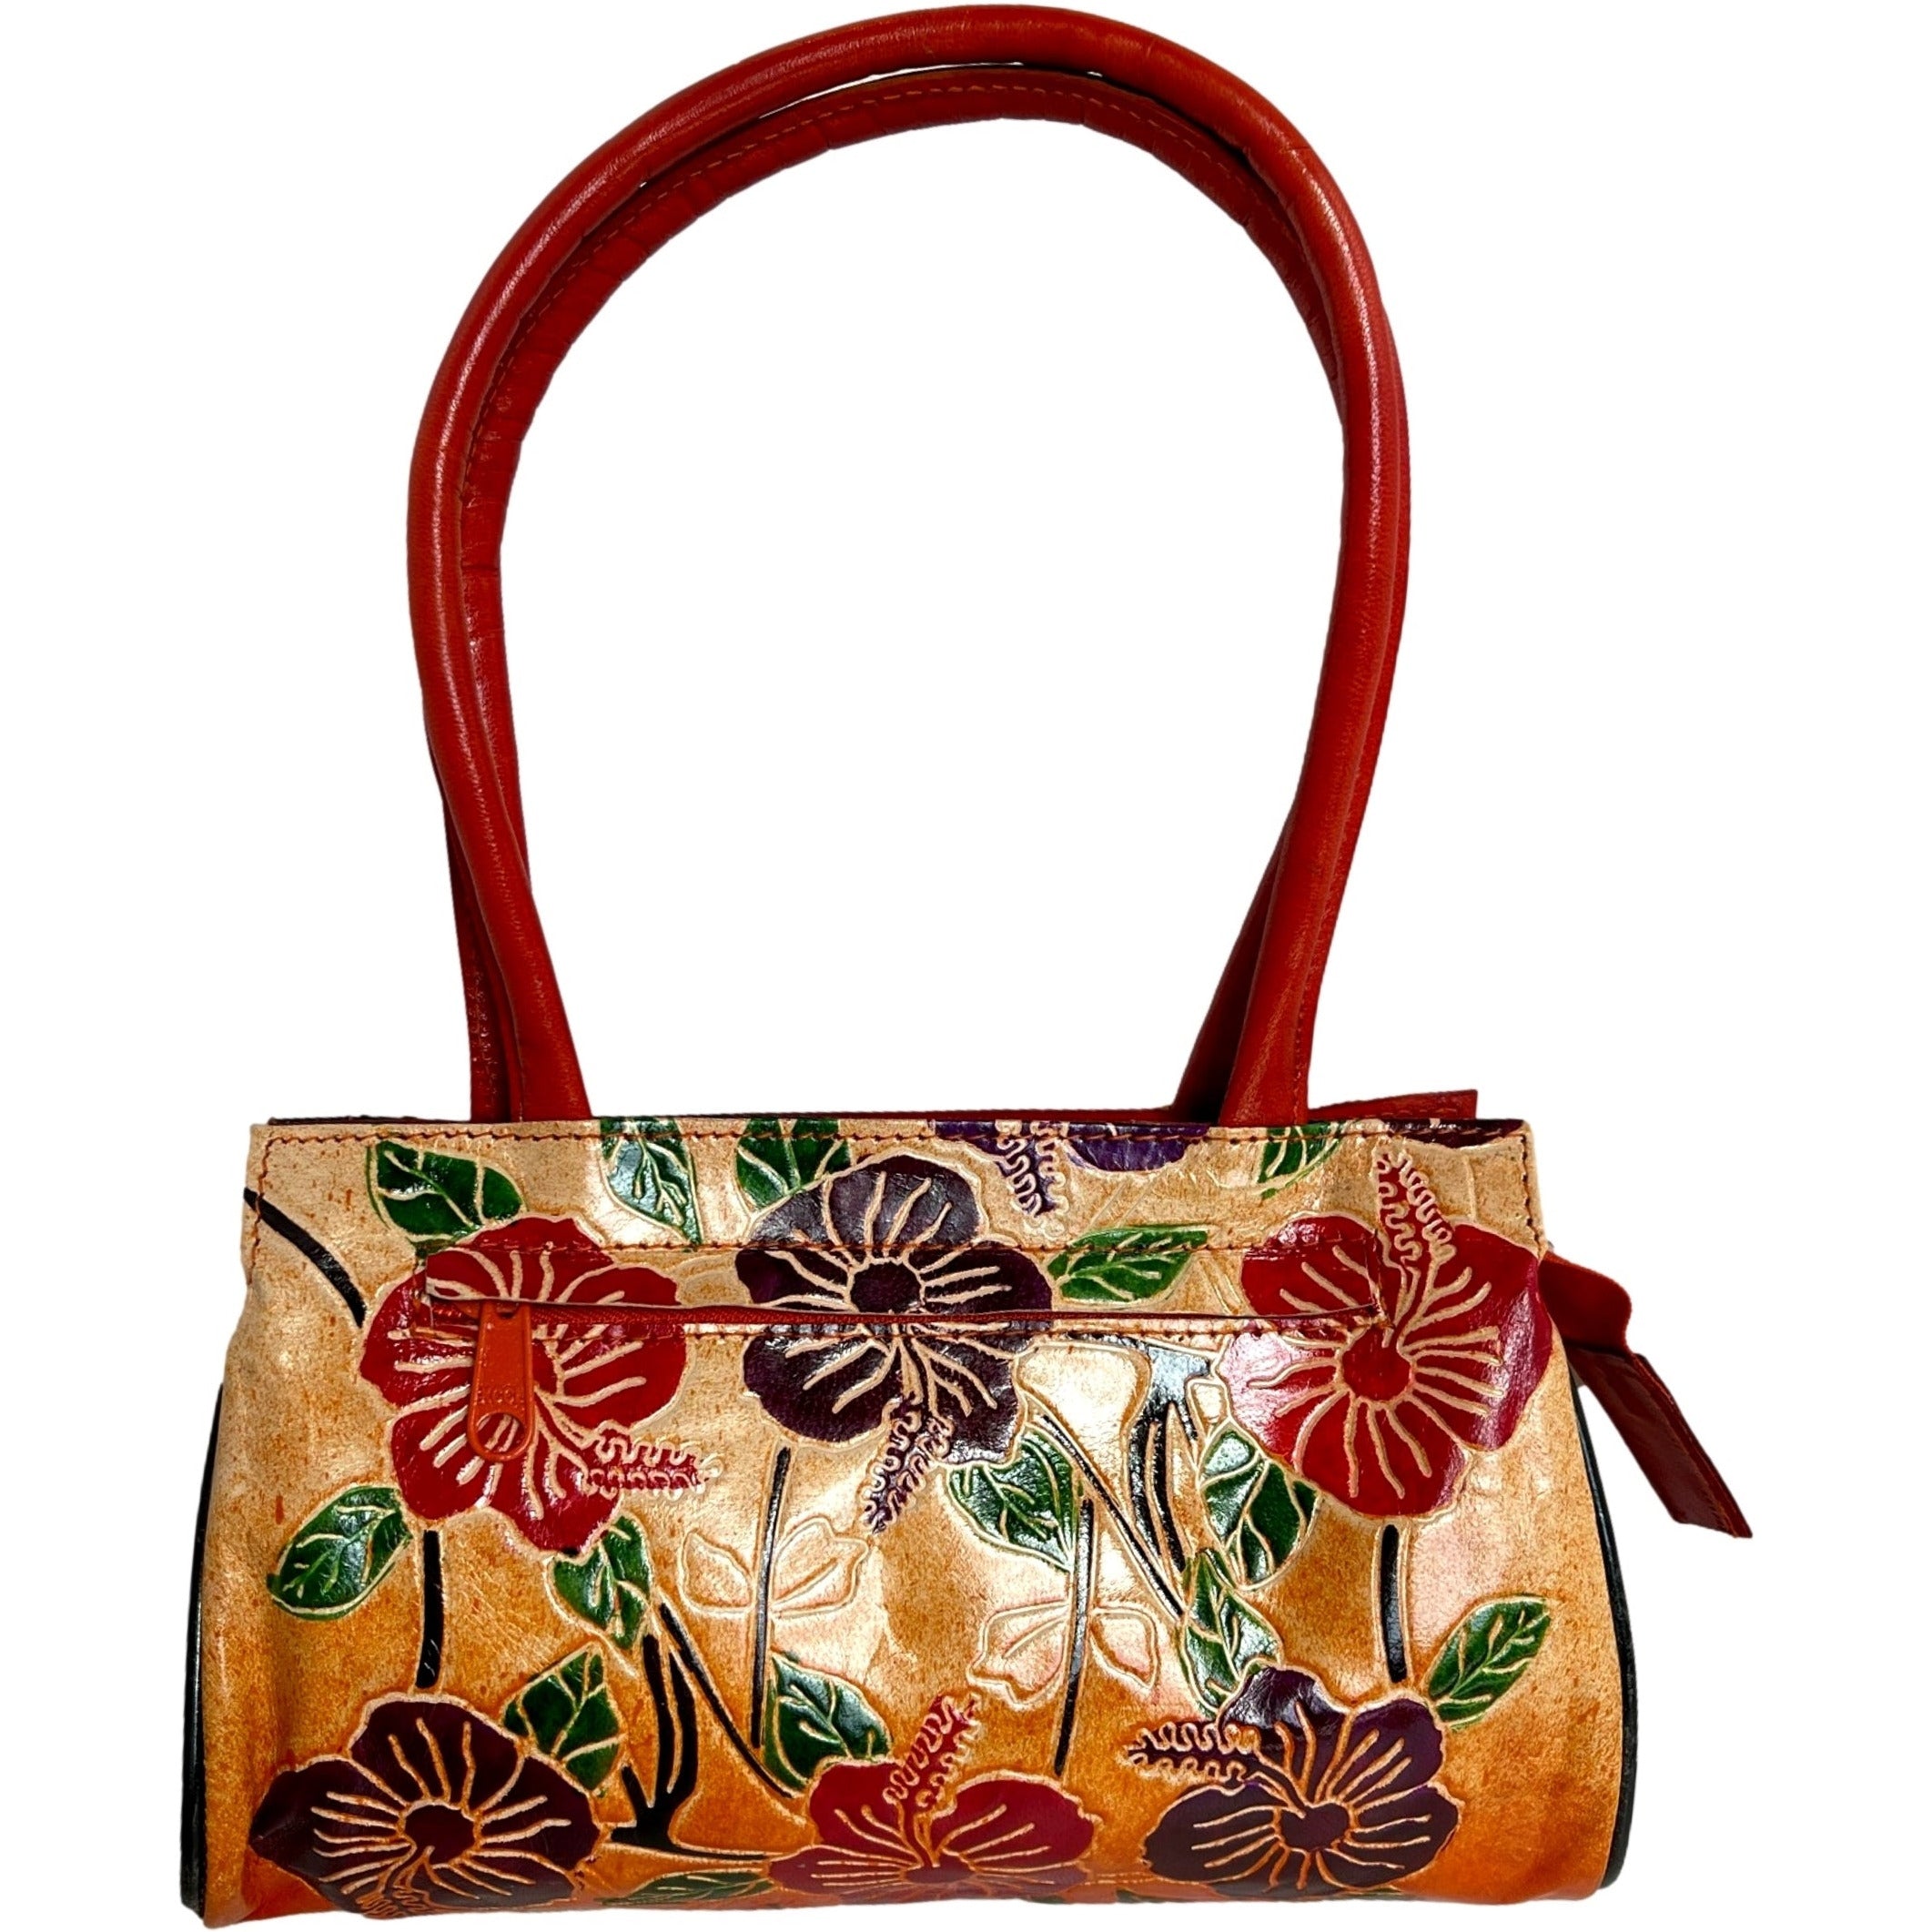 Buy CLASSIQUE Shantiniketan Pure Leather Ethnic Printed Hand Bag Purse  Small at Amazon.in